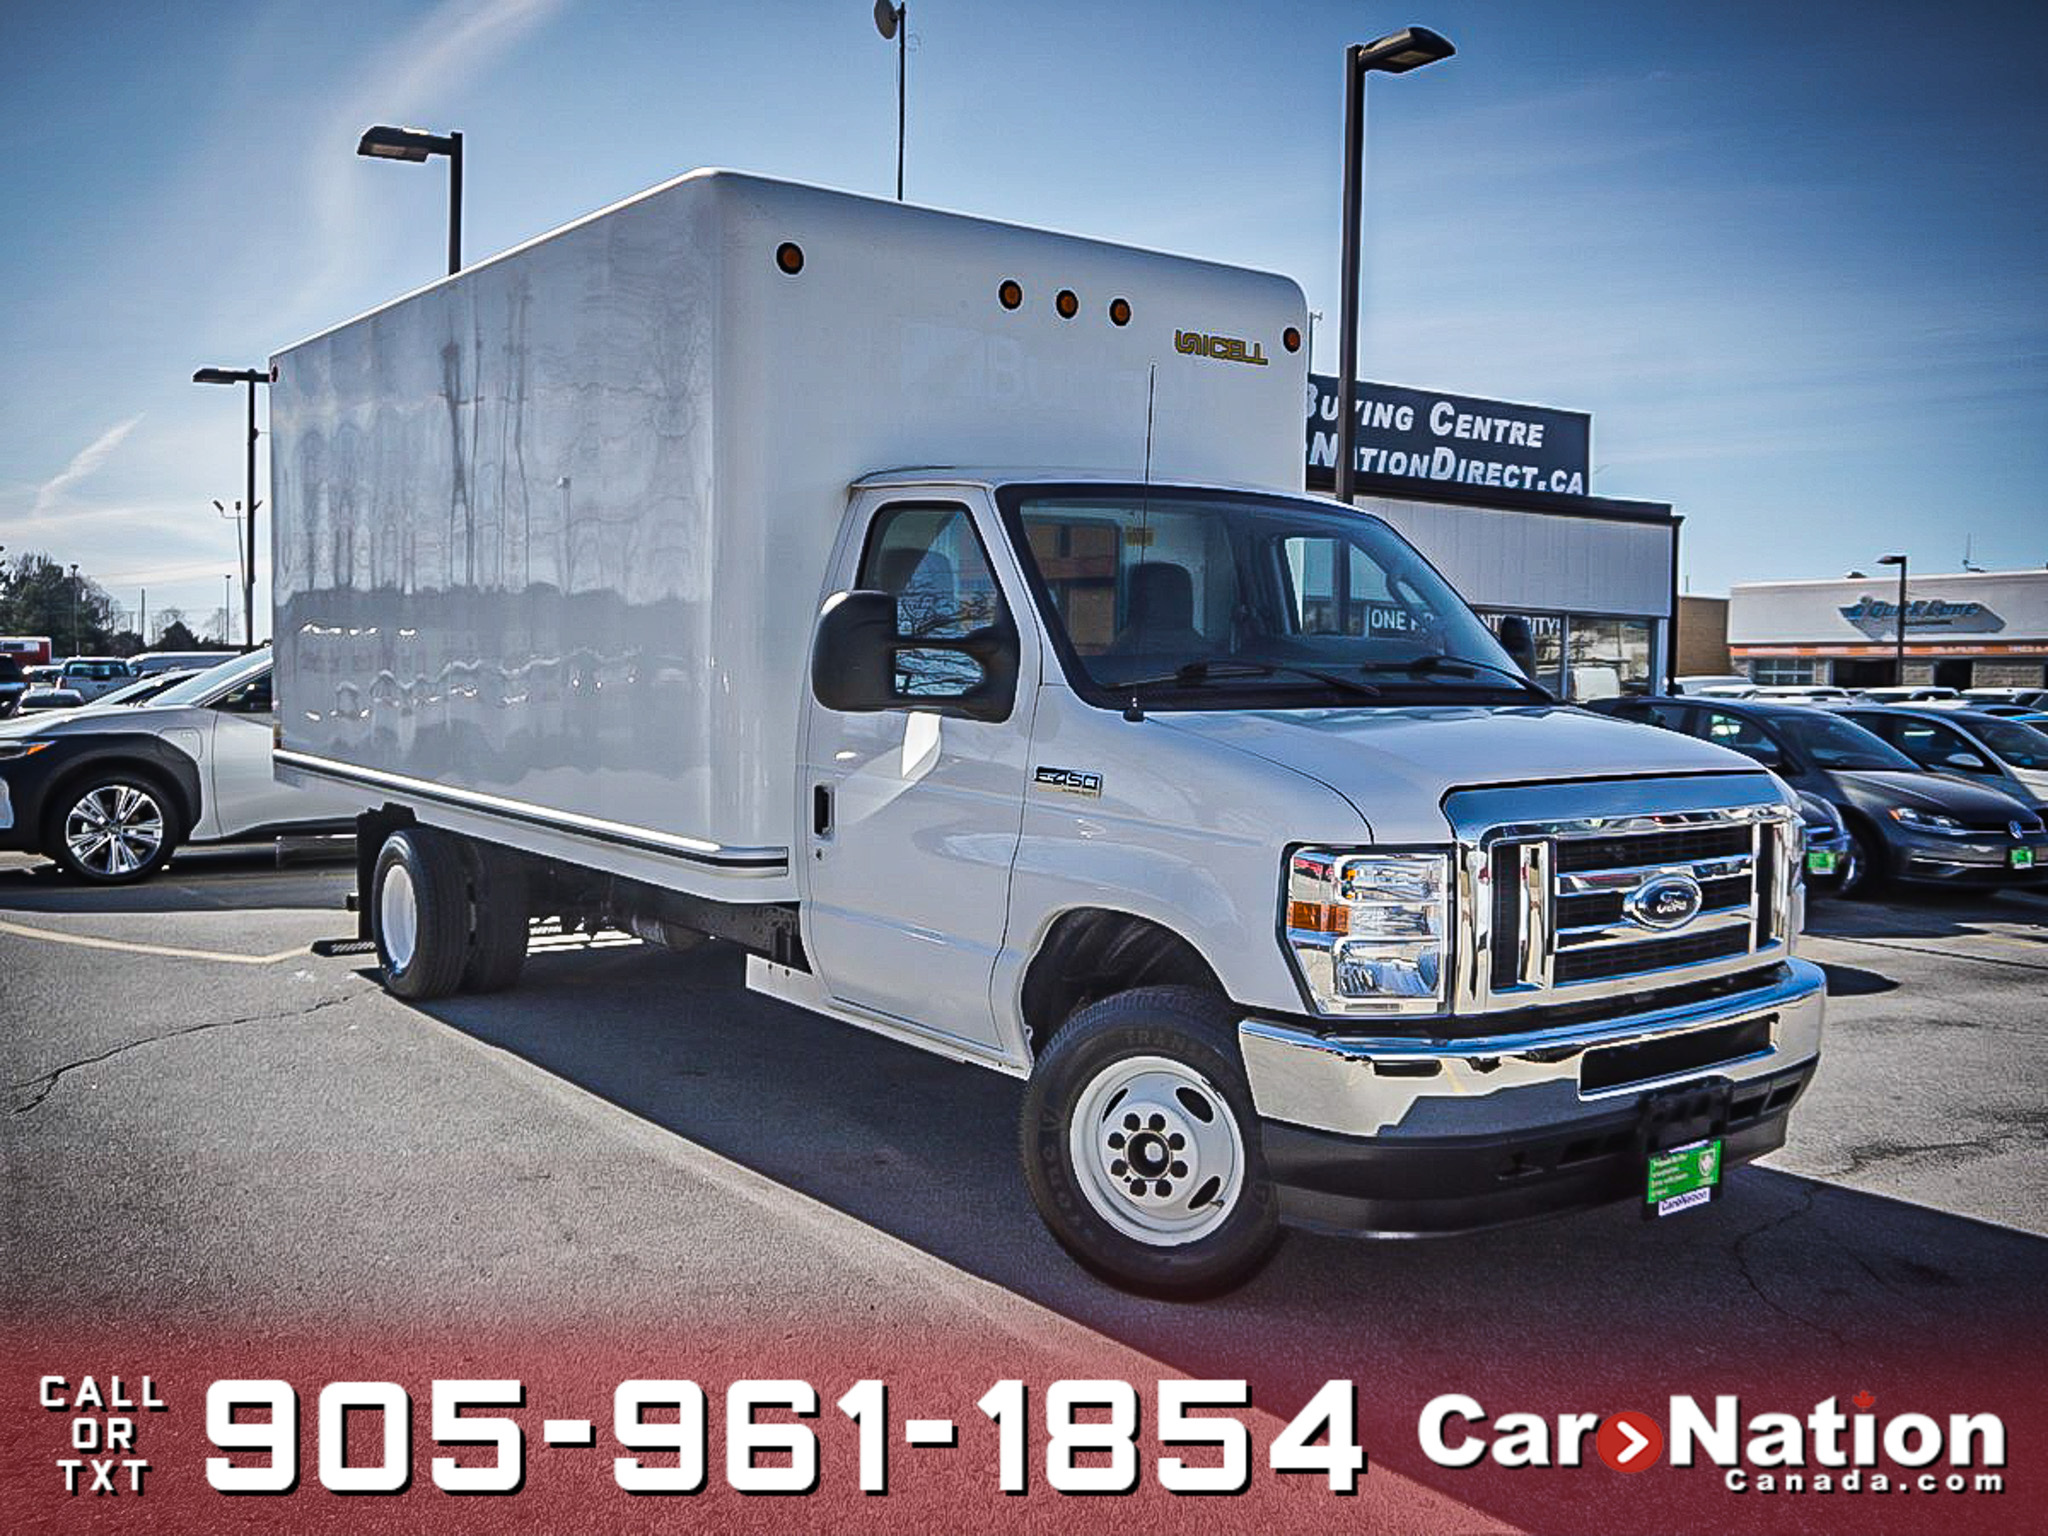 2021 Ford E-Series Cutaway E-450 Cube Van | Certified Pre-Owned | Work Ready